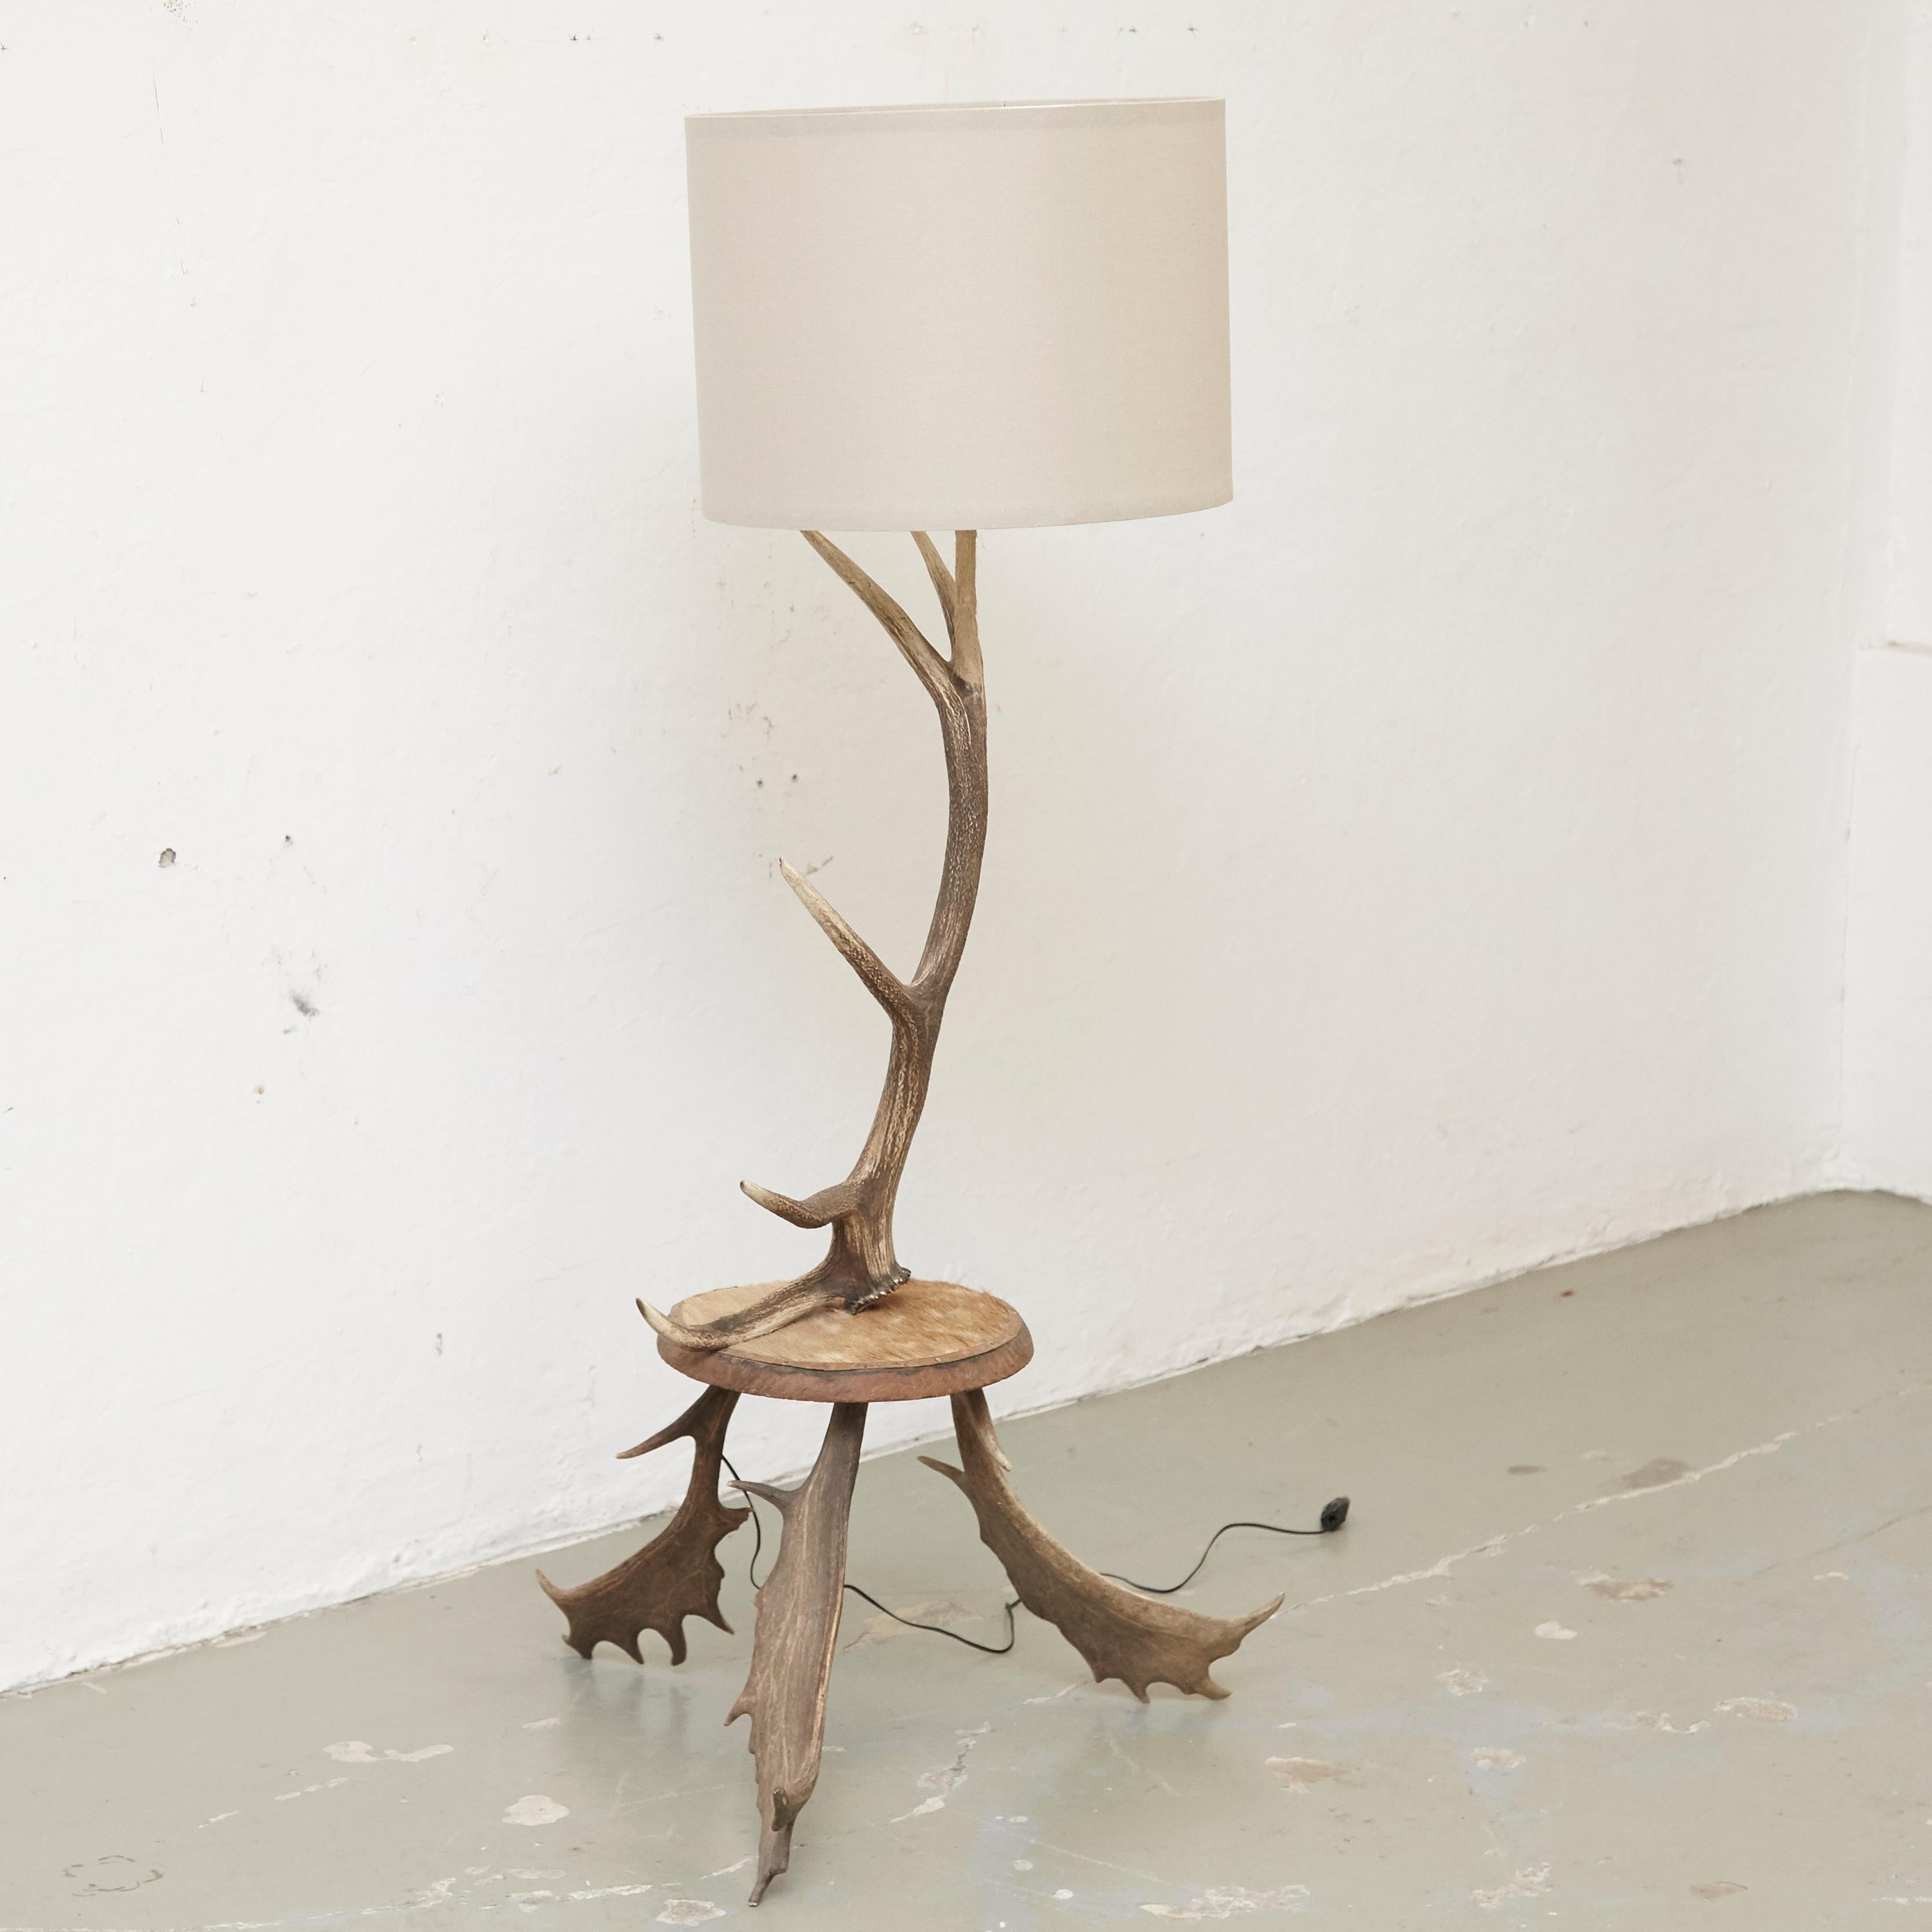 Natural Antler deer horn floor lamp

Measures: H 132 x W 70 x D 70

In good original condition, with minor wear consistent with age and use, preserving a beautiful patina.

We offer fast worldwide shipping options. All our shipping quotes also